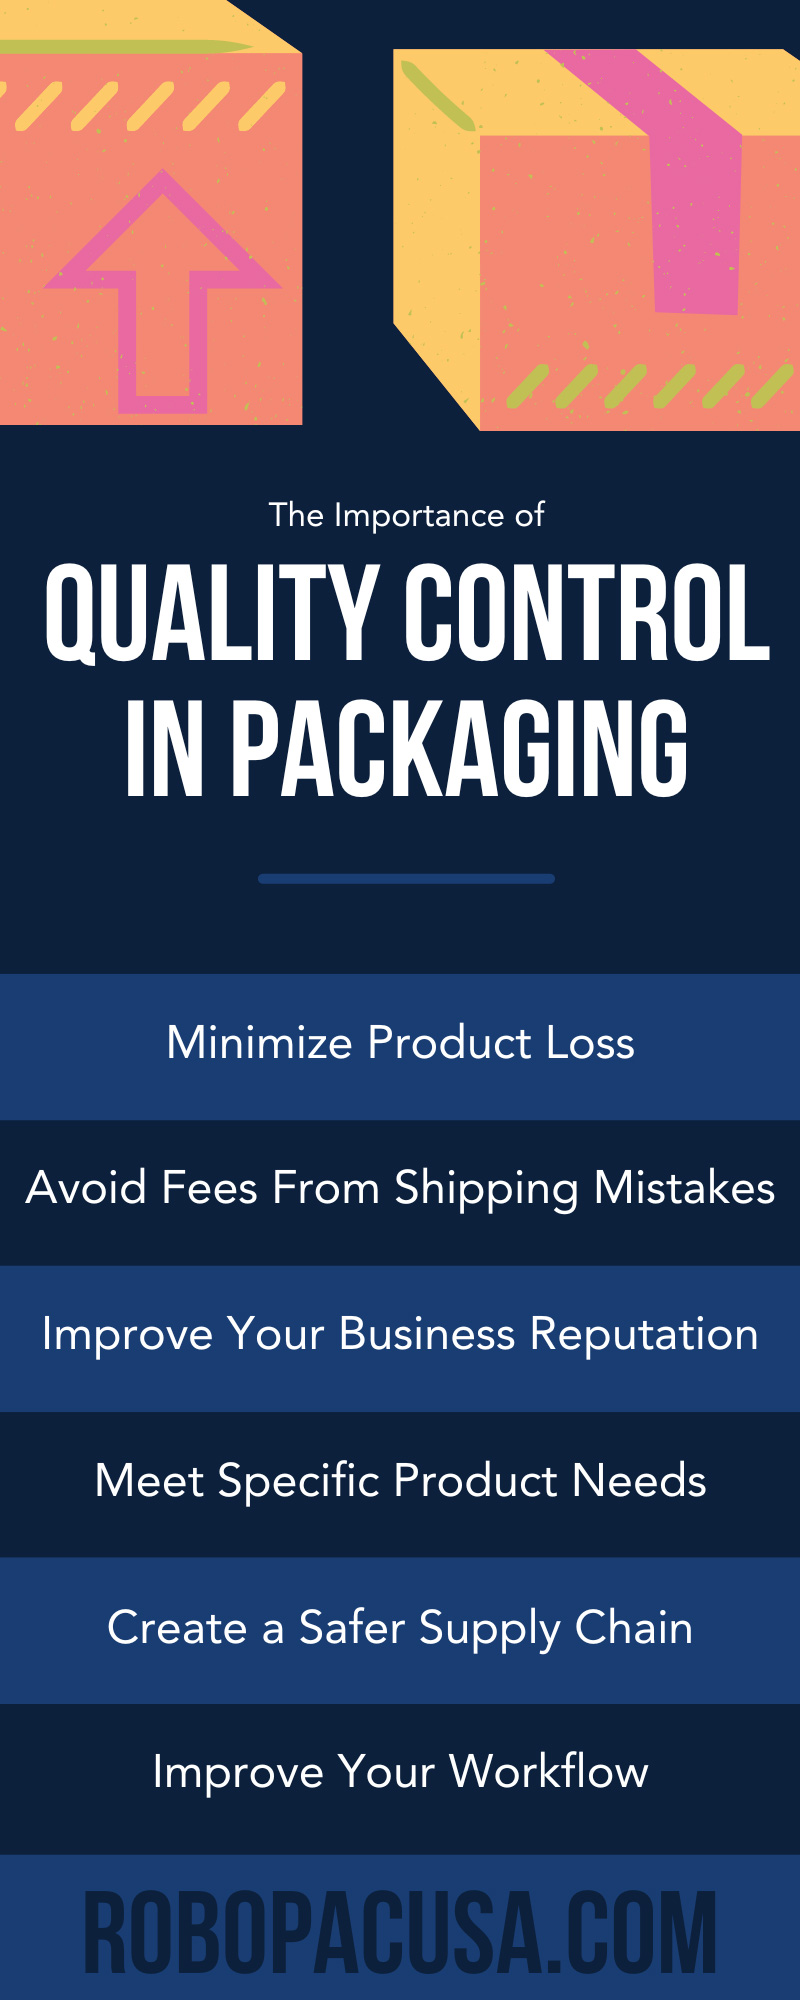 The Importance of Quality Control in Packaging